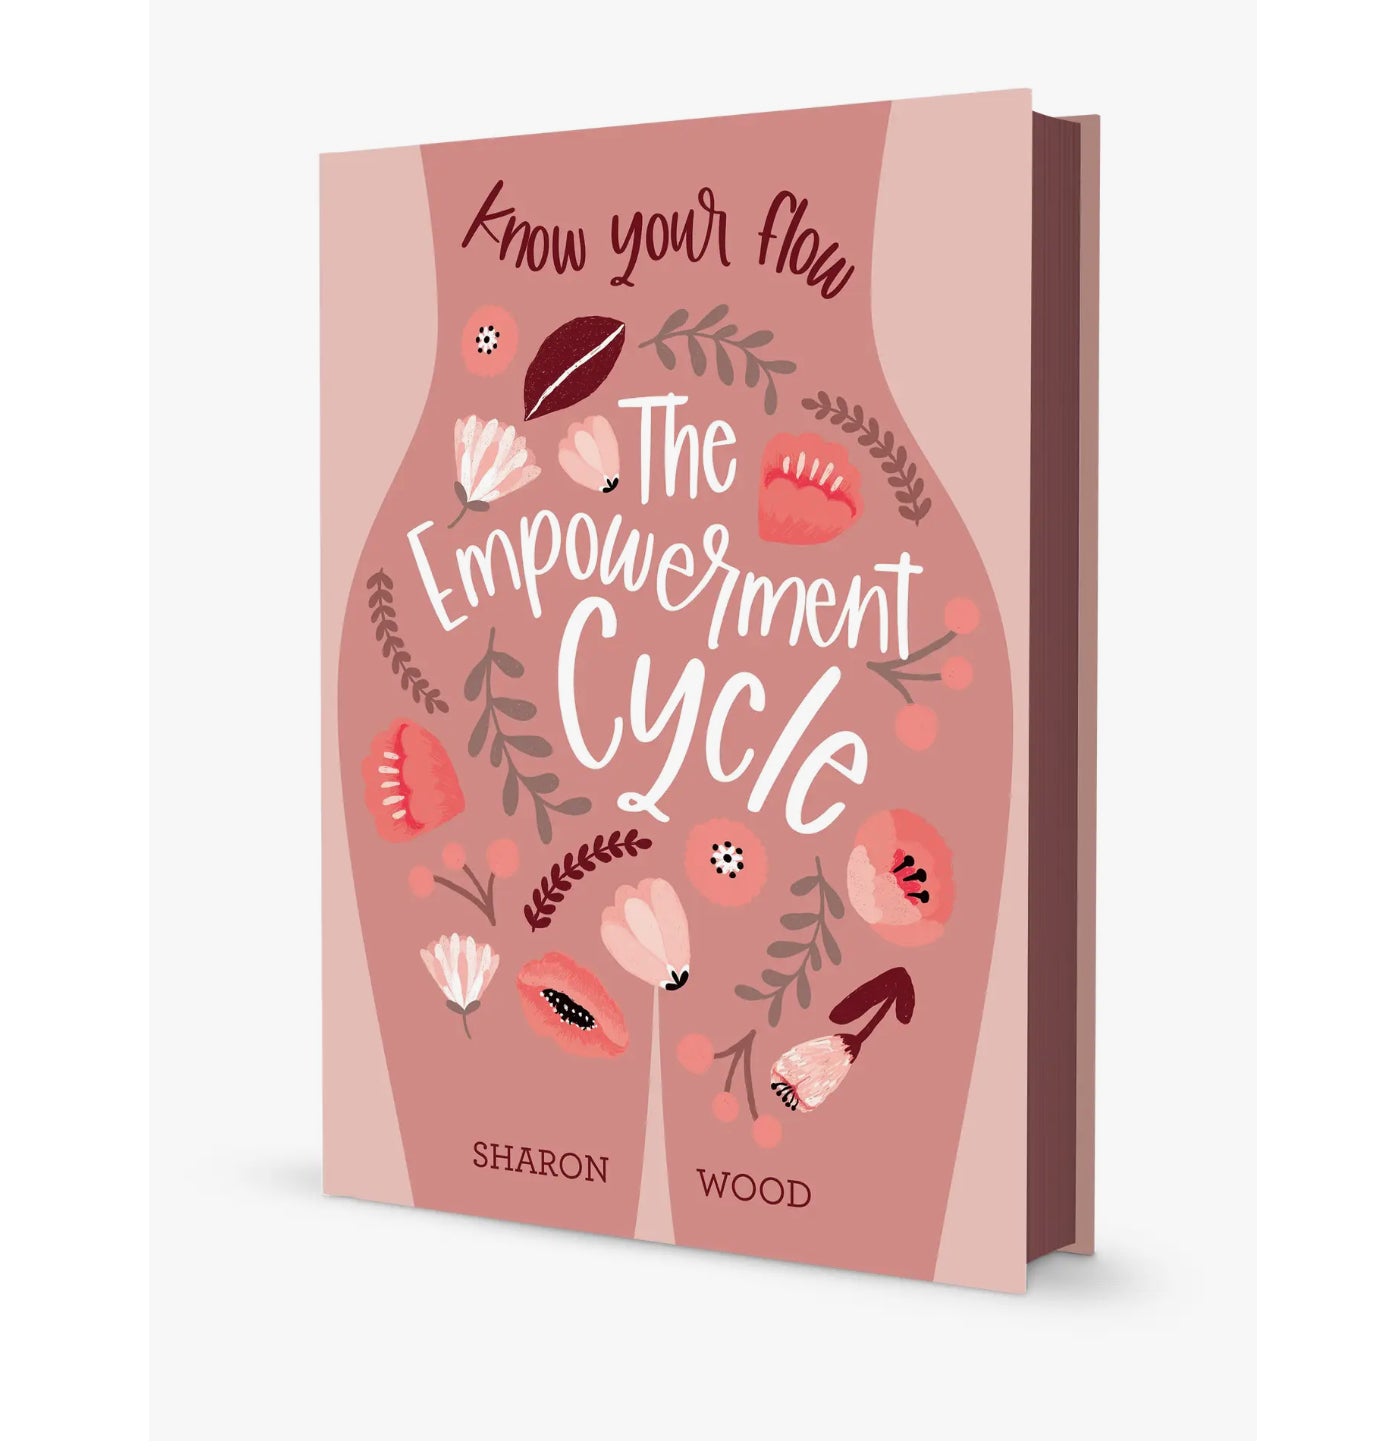 The Empowerment Cycle Book